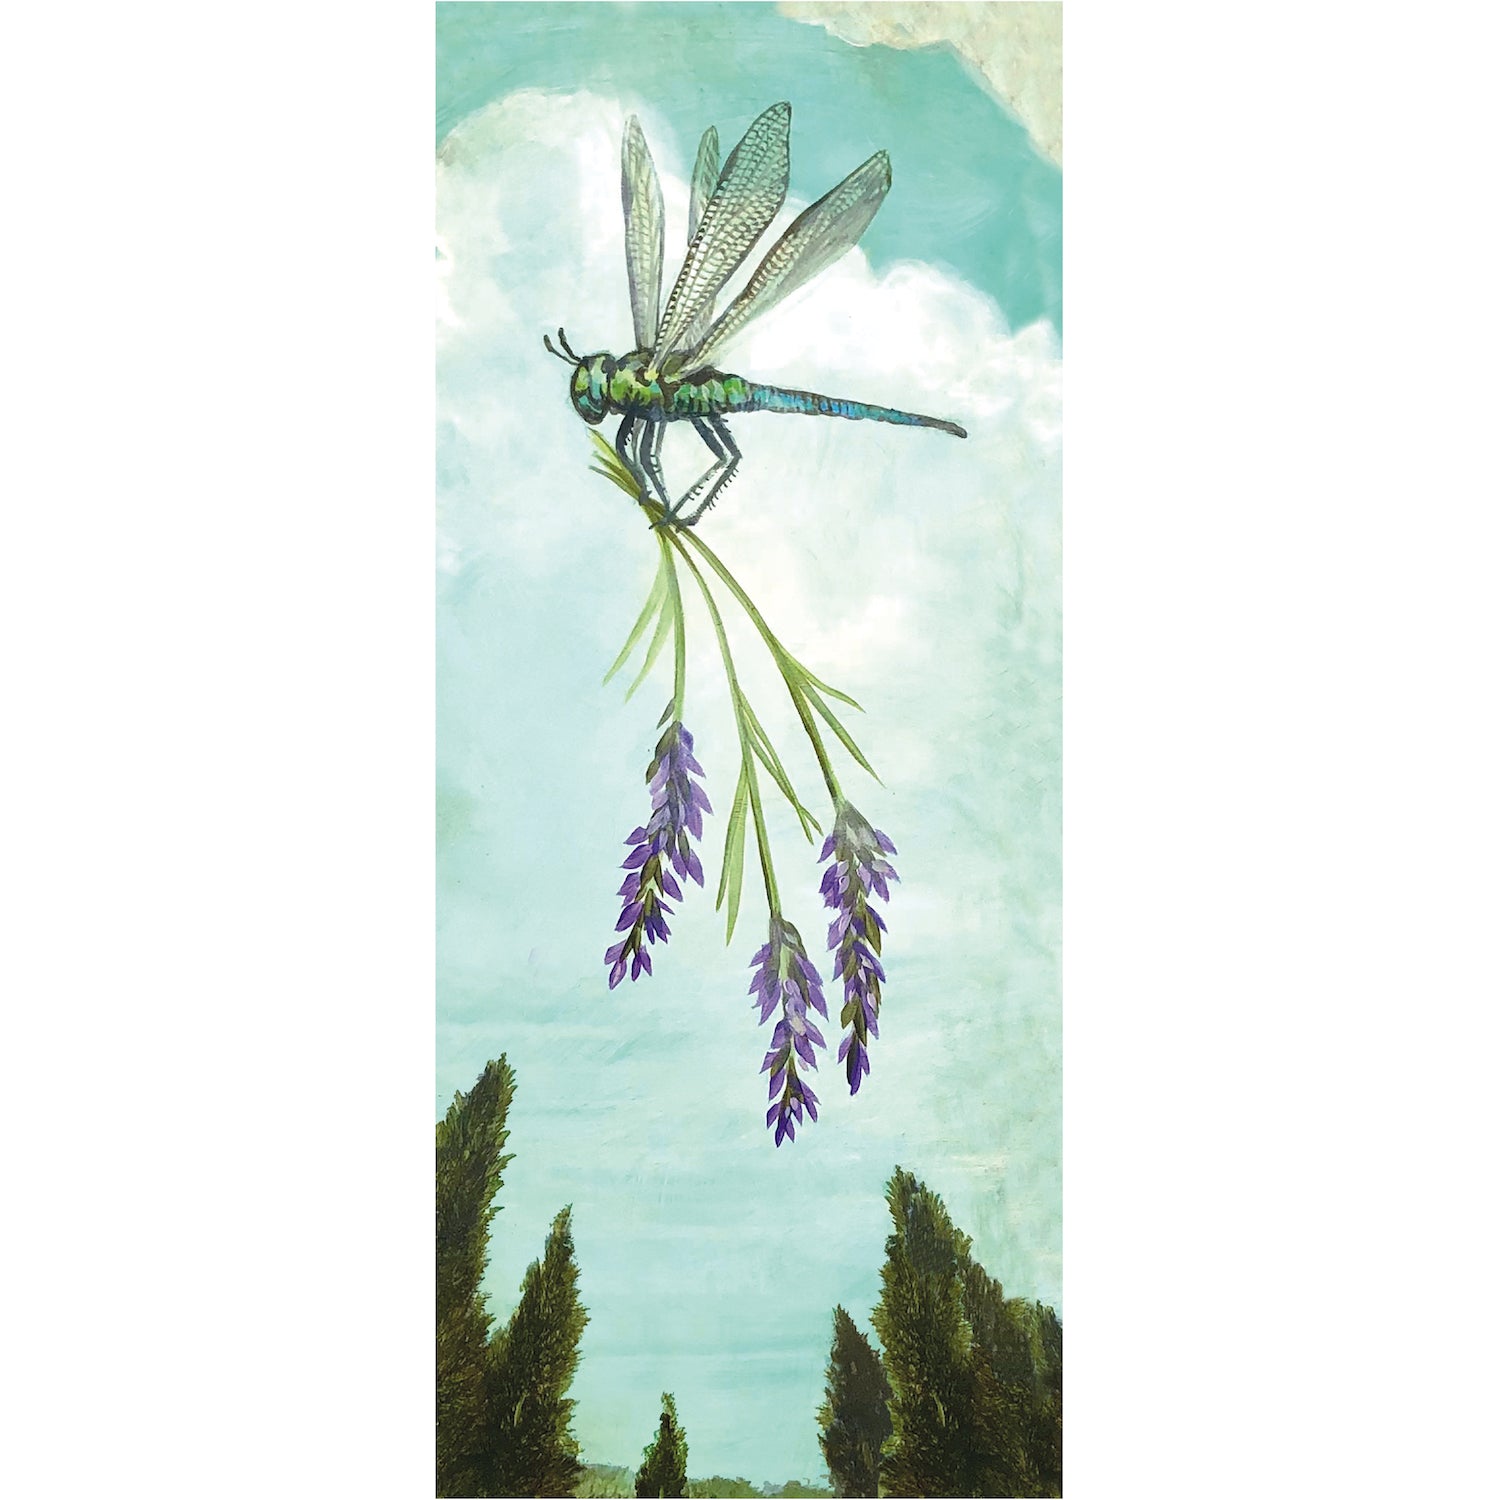 A Dragonfly Journey Card from Hester &amp; Cook with lavender flowers adorned on its delicate wings, creating a captivating masterpiece of nature&